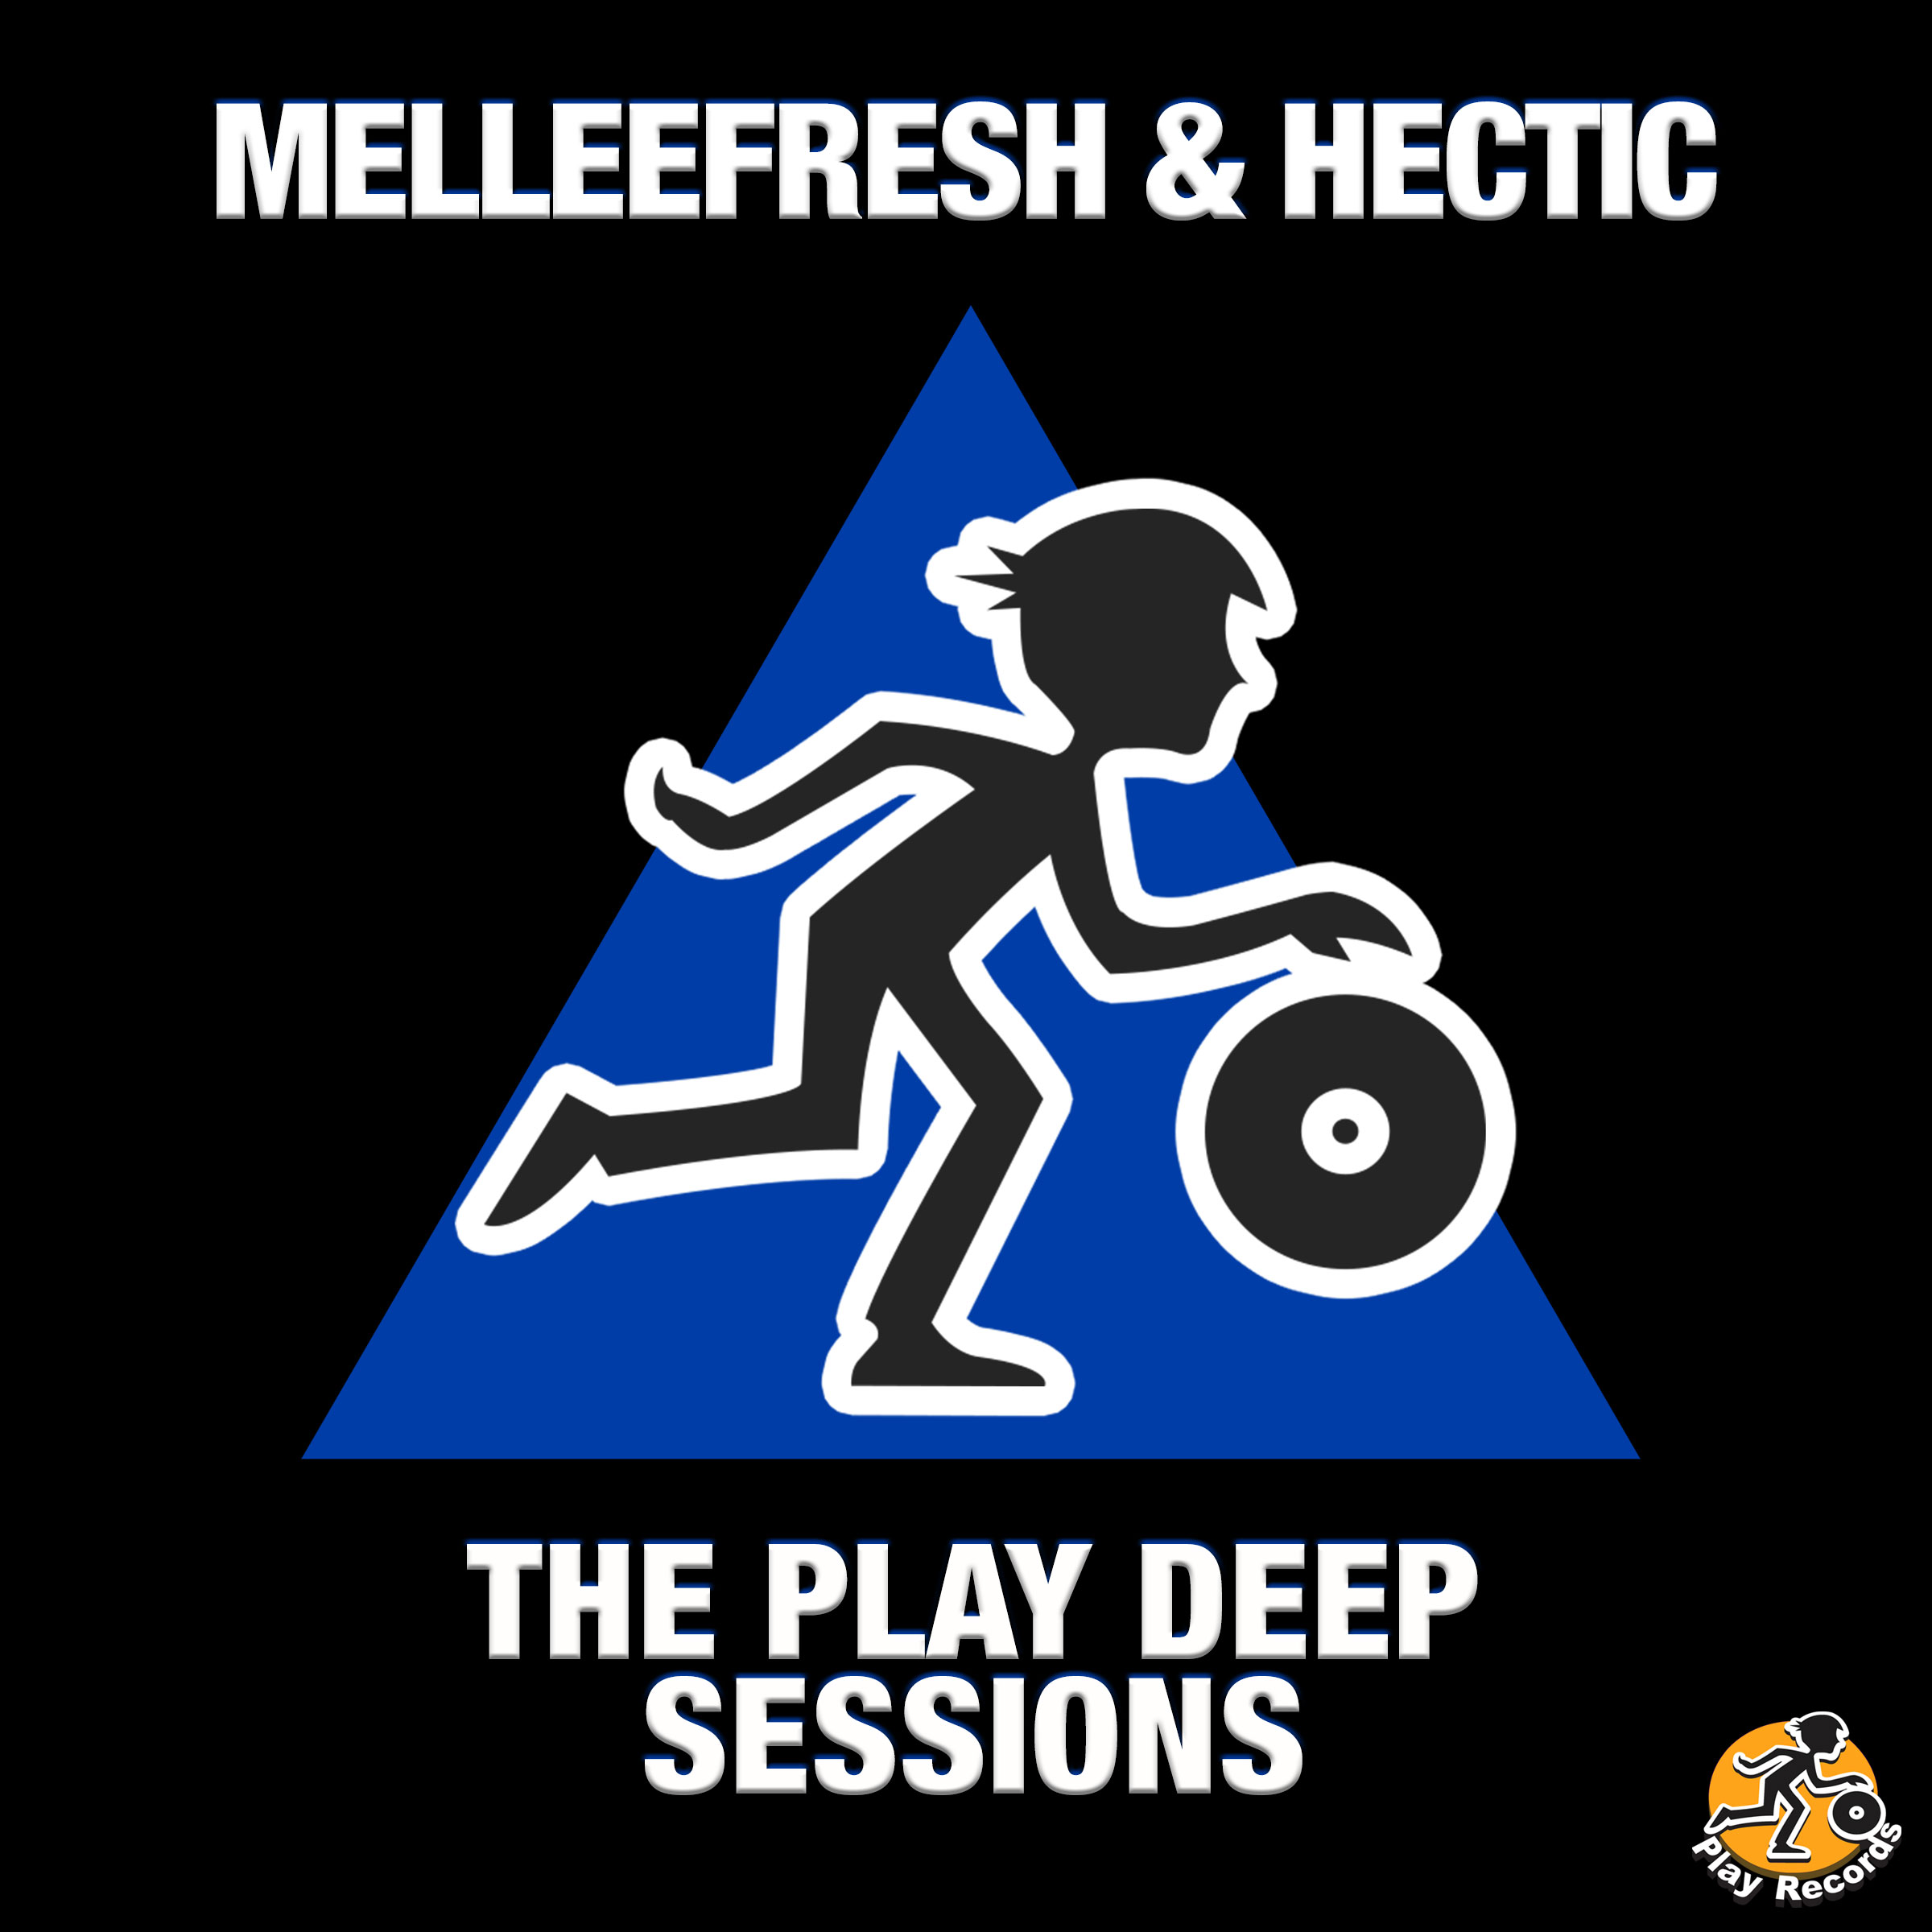 Melleefresh and Hectic Heat Up the Dancefloor with 'The Play Deep Sessions'